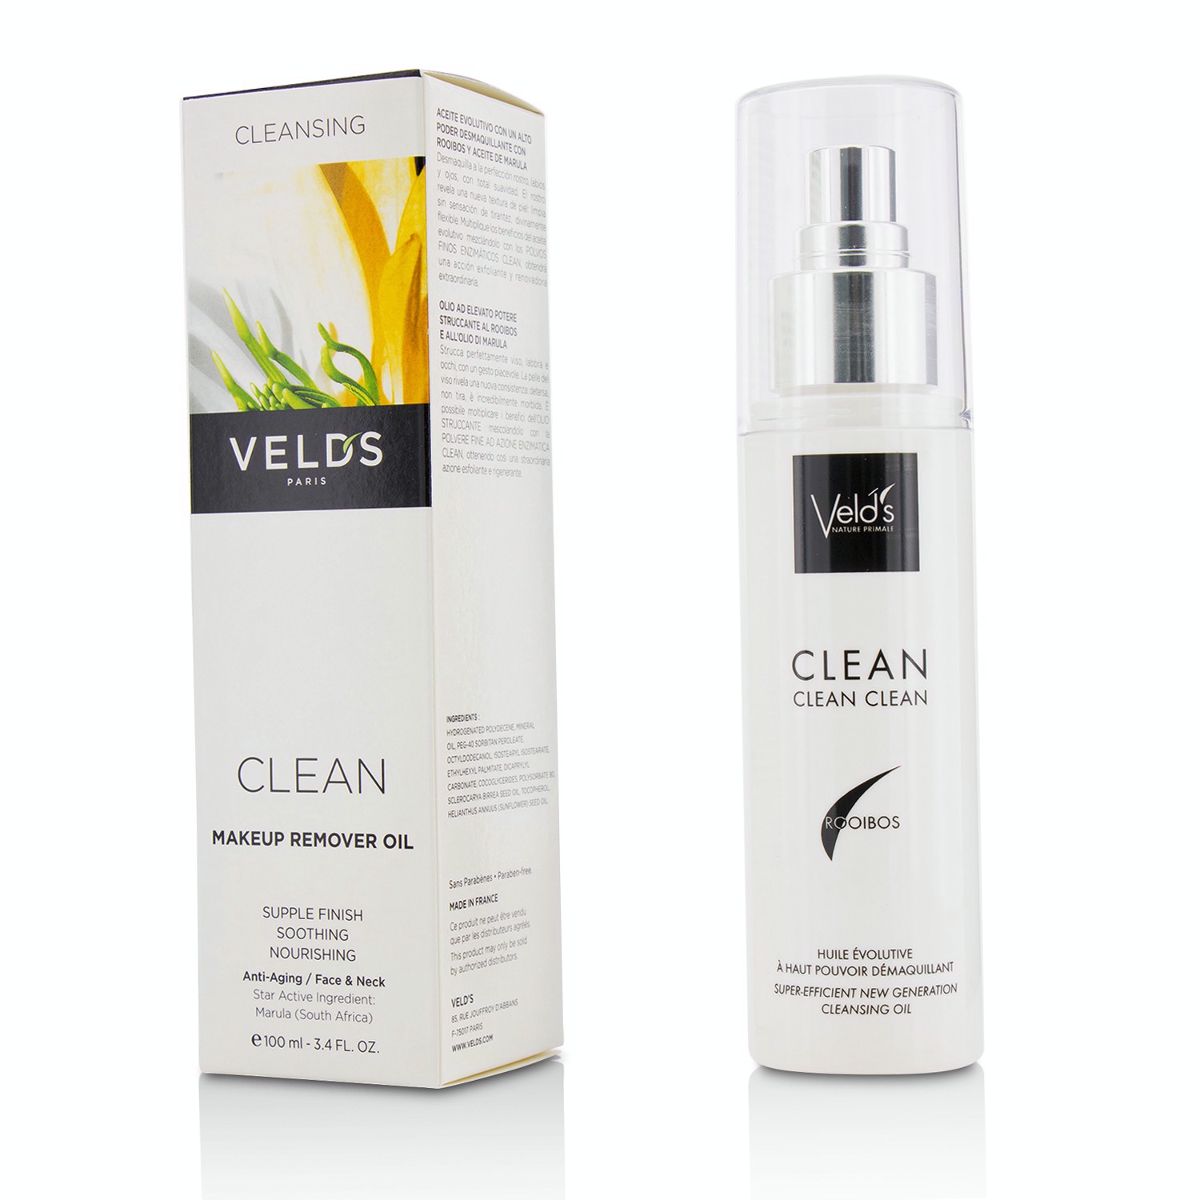 Clean Makeup Remover Oil Velds Image